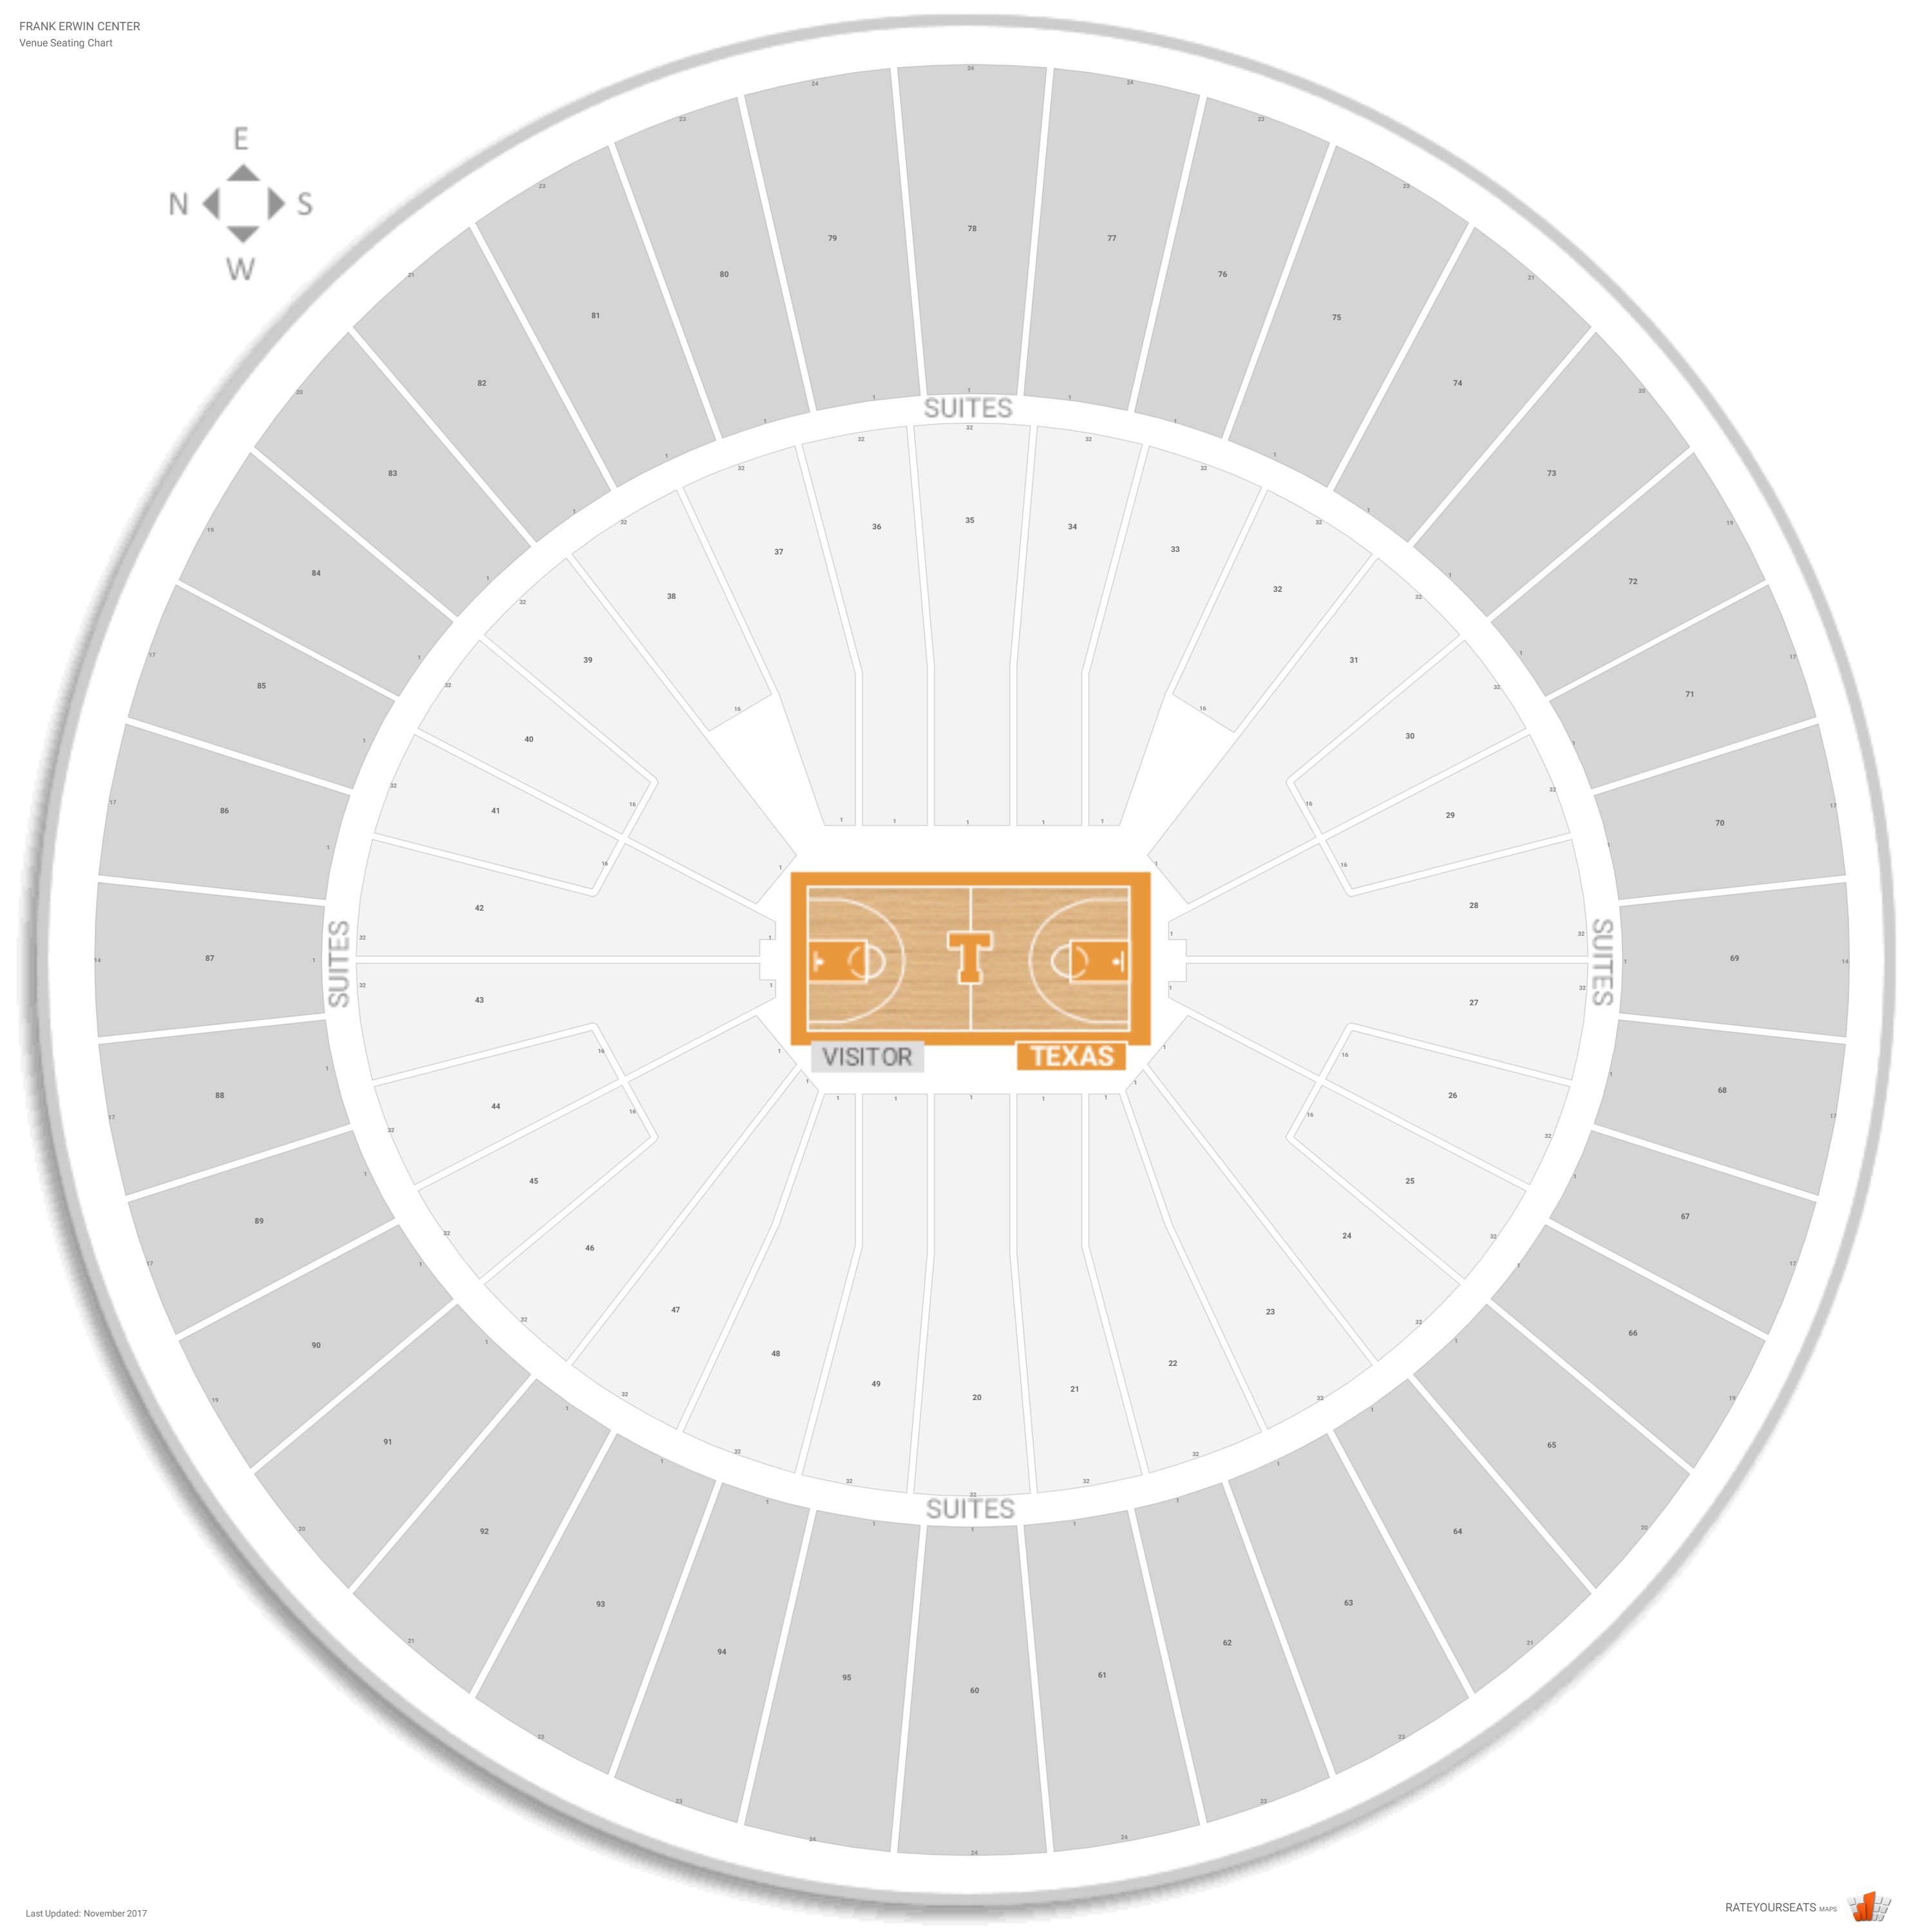 Frank Erwin Center Seating Chart View